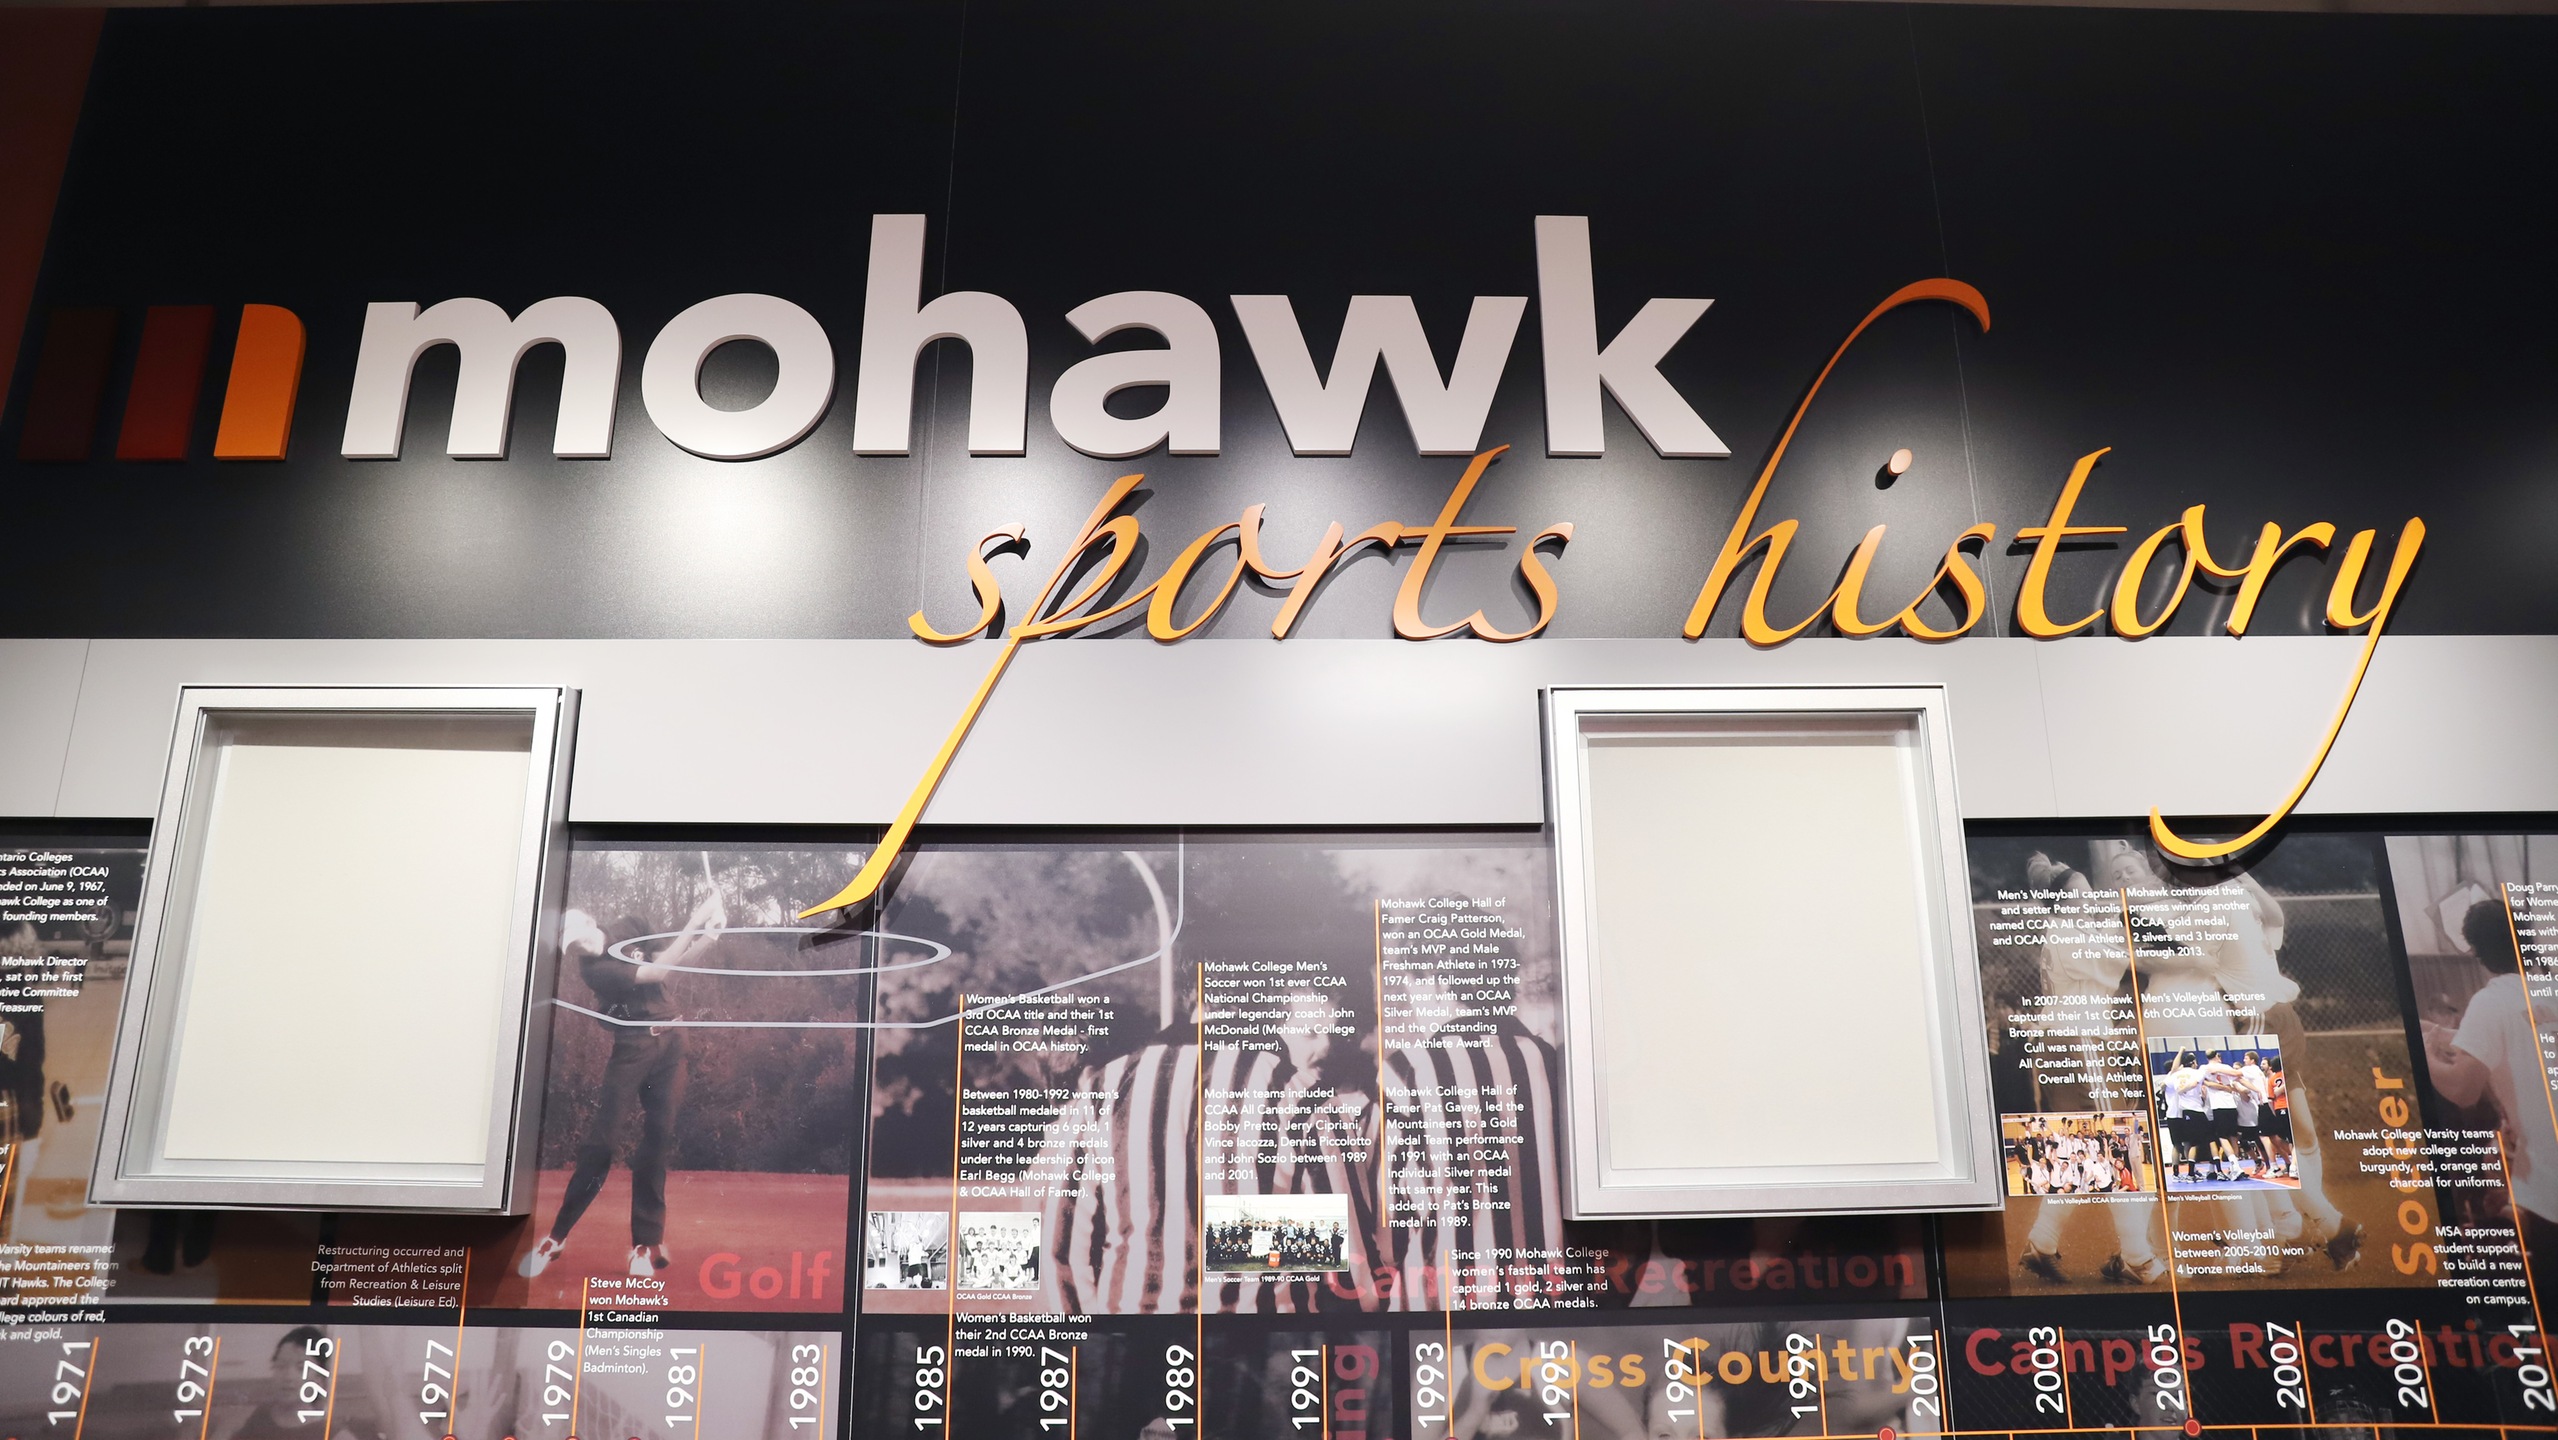 Mohawk Hall of Fame Wall